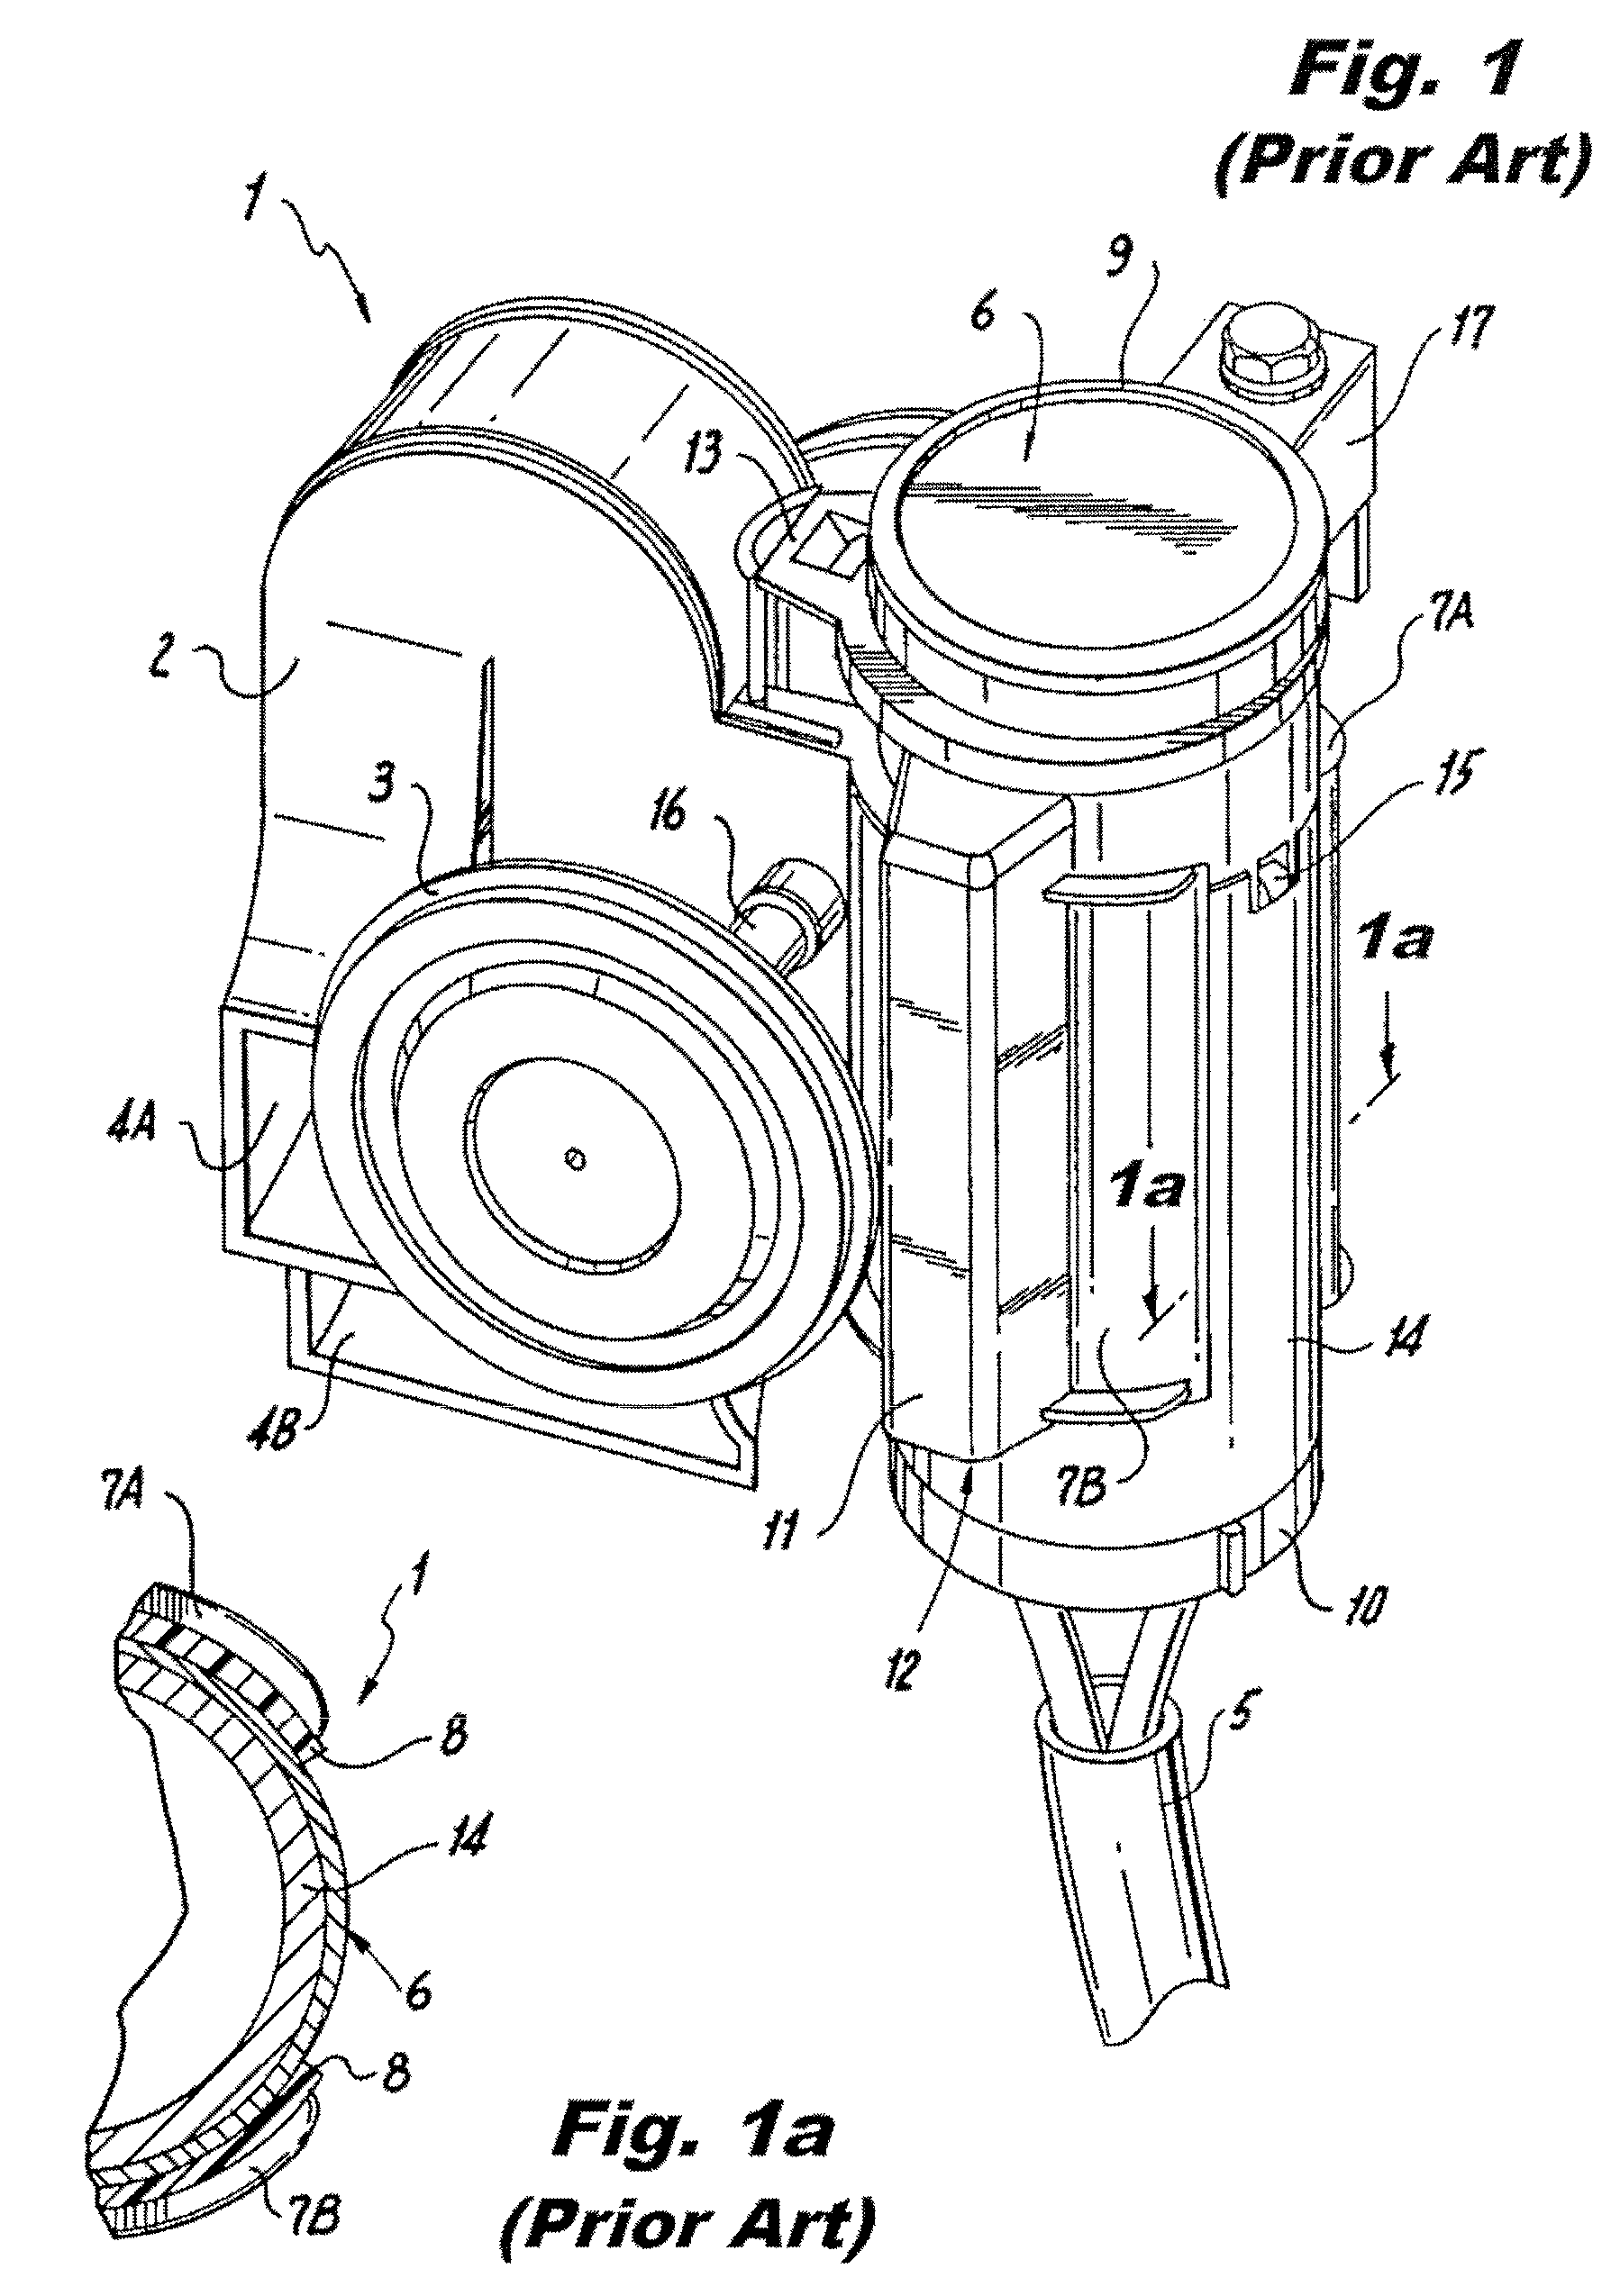 Electropneumatic horn with air venting channels